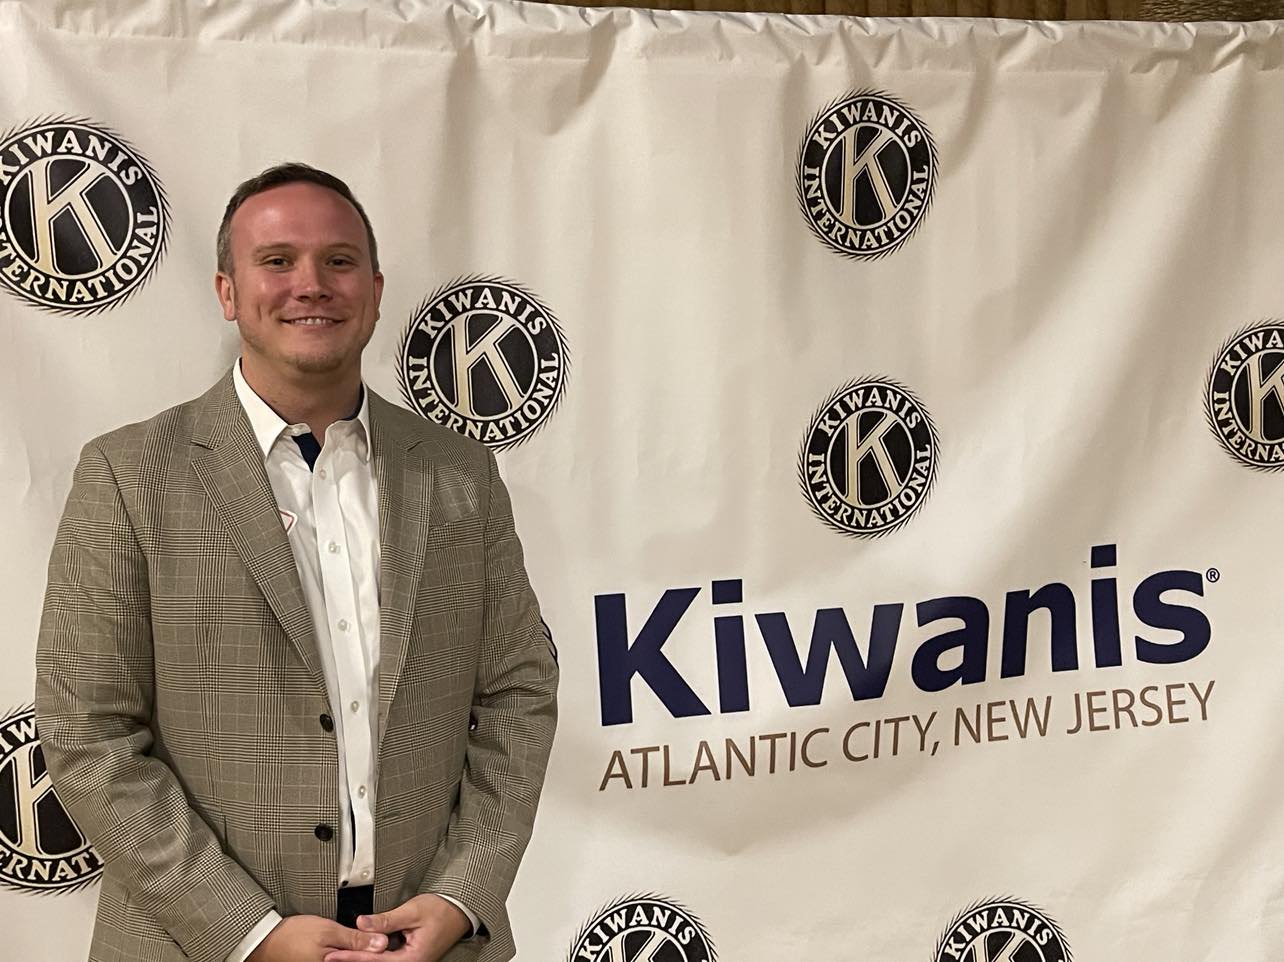 Martin Slezak is the treasurer for the New Jersey district of Kiwanis International. He came to support Atlantic City's new start. Photo Credit: Mark Tyler